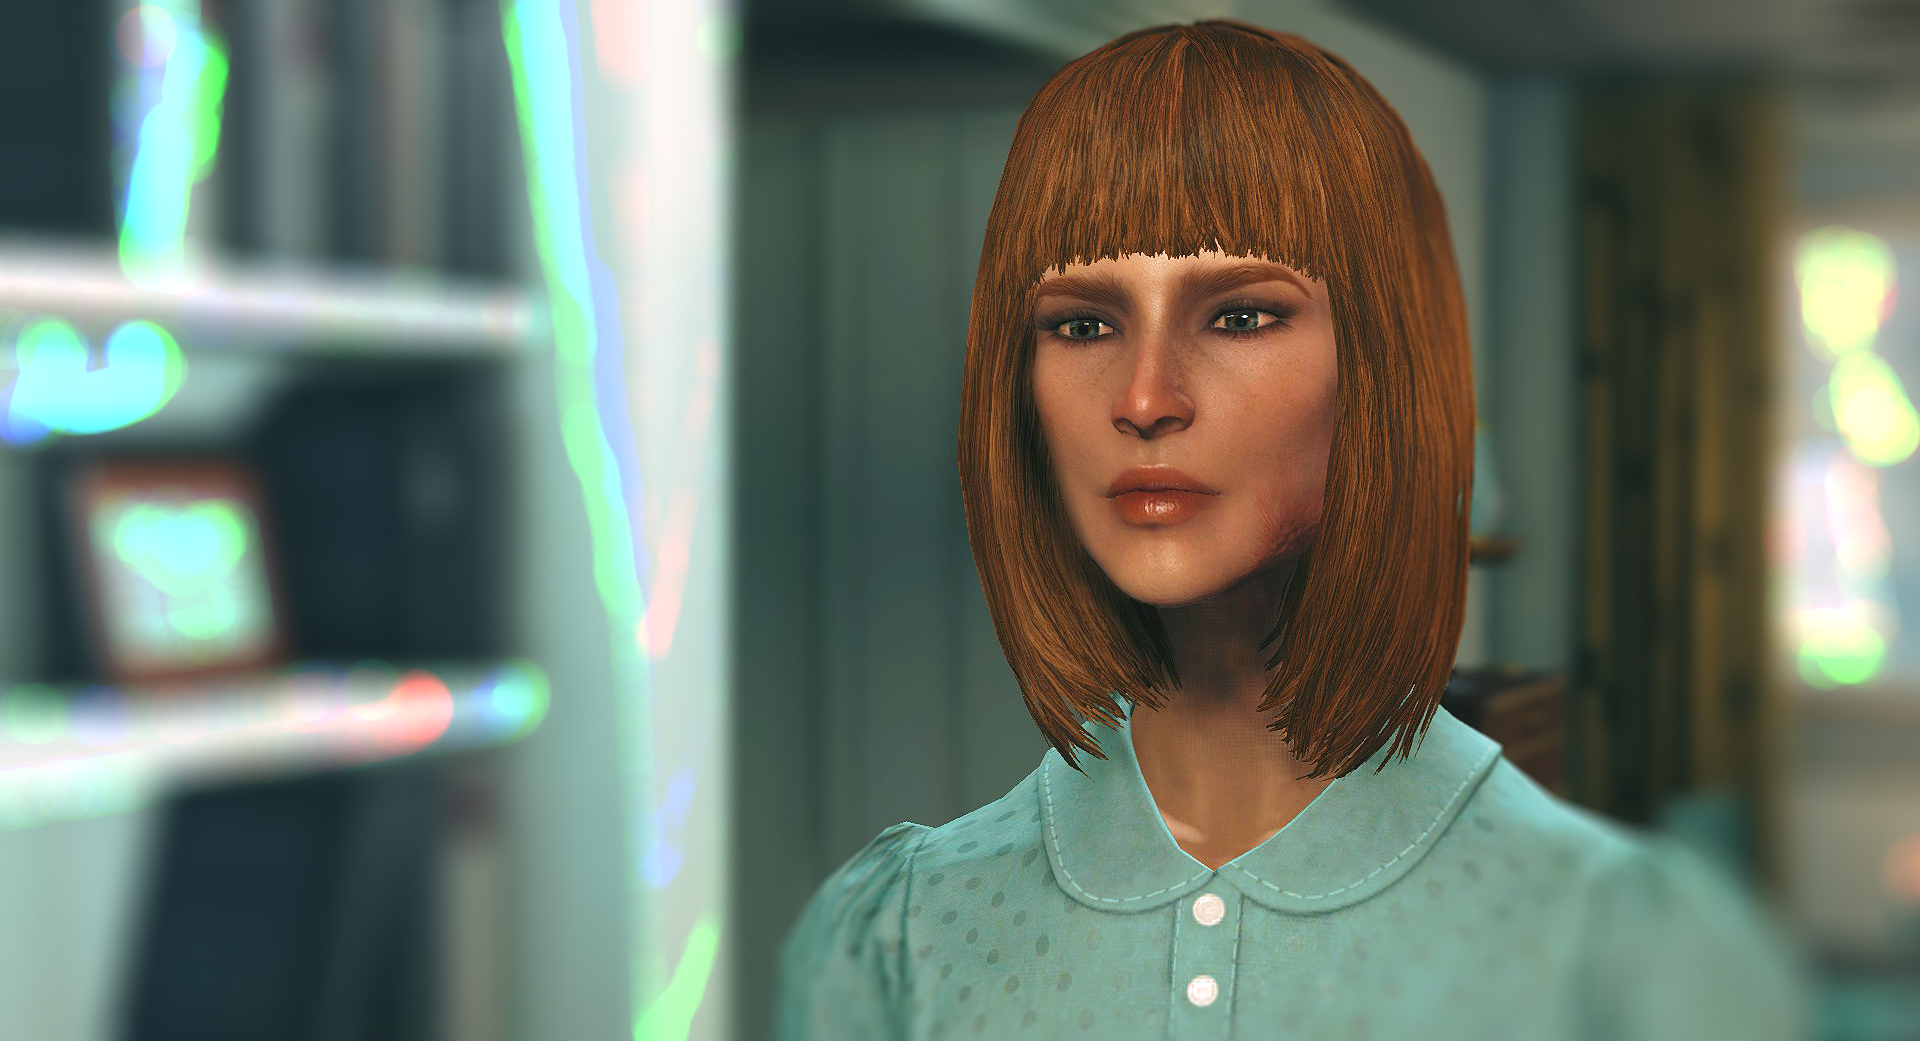 female face young texture mods fallout fallout4 textures fo4 nexus models